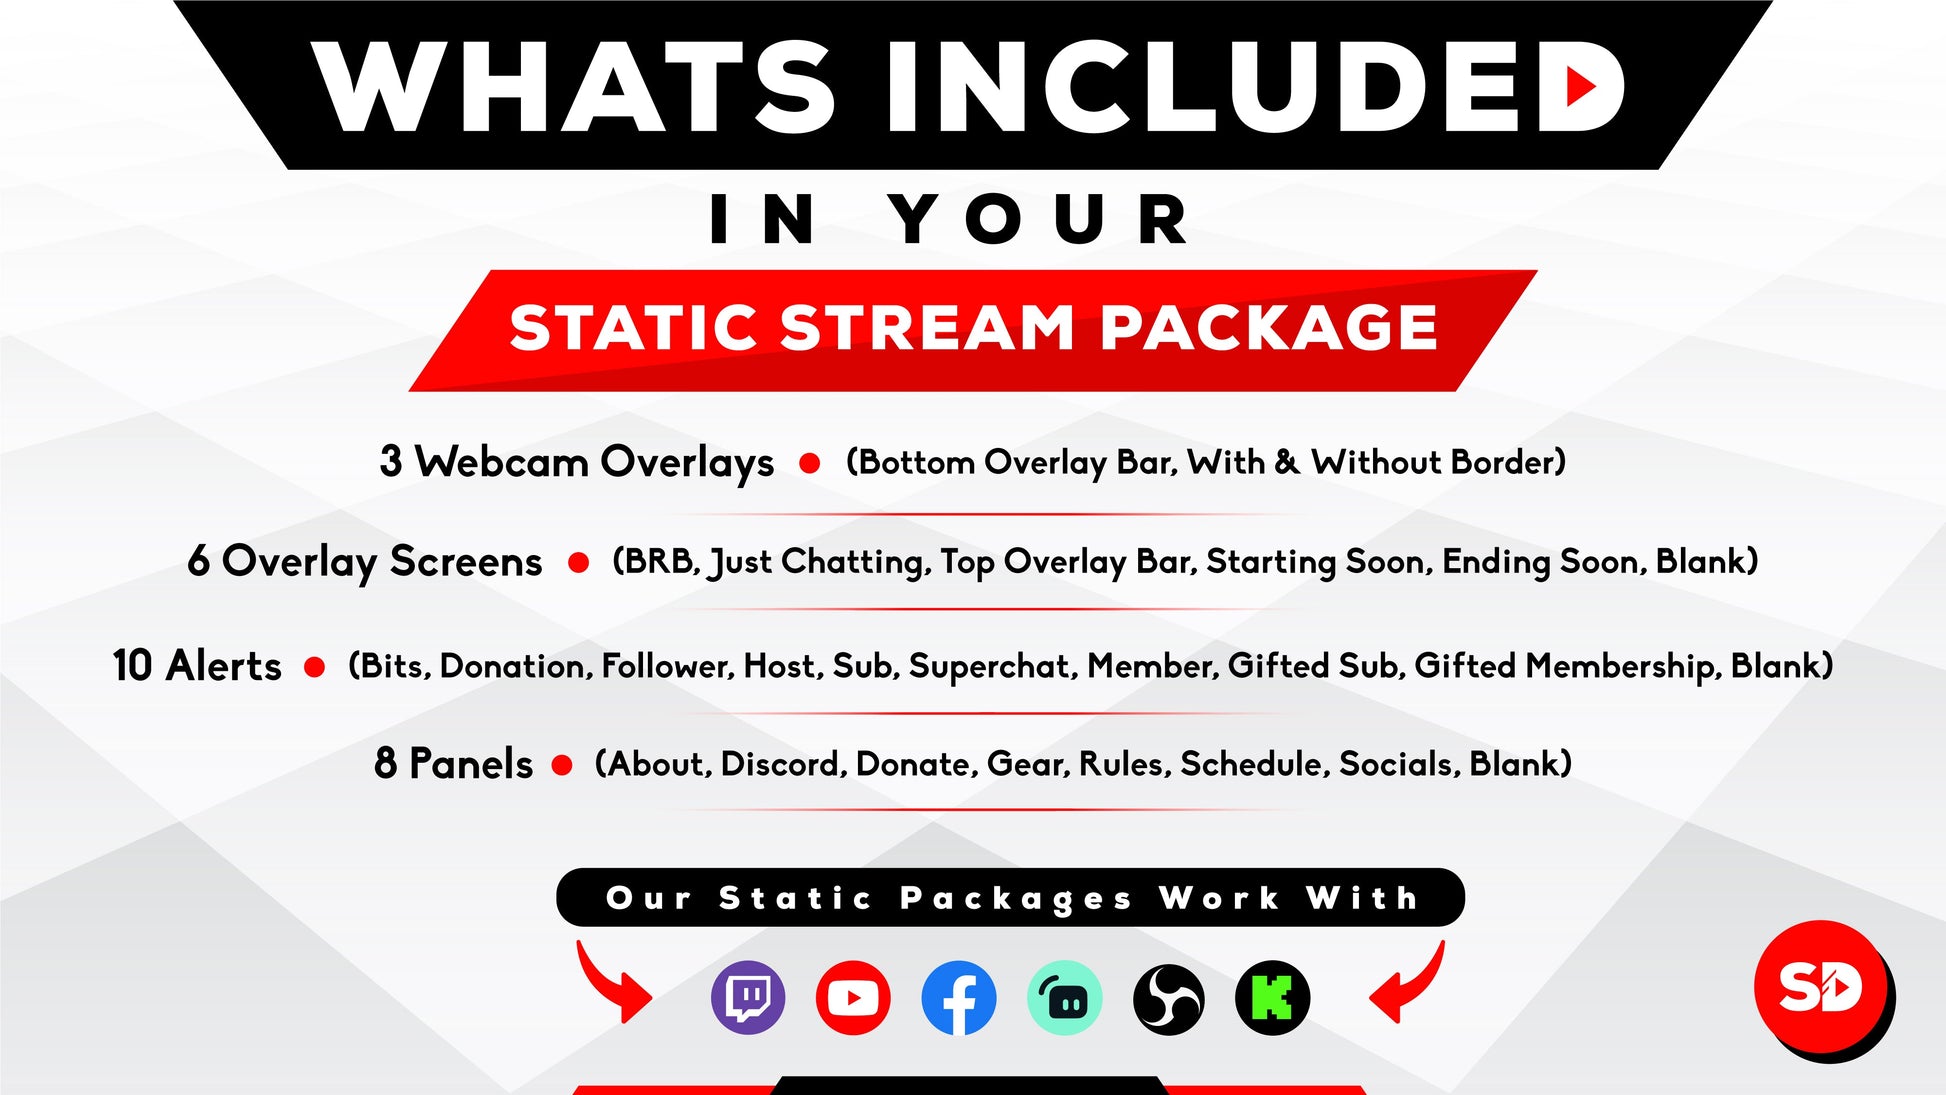 whats included in your static stream package - legends - stream designz